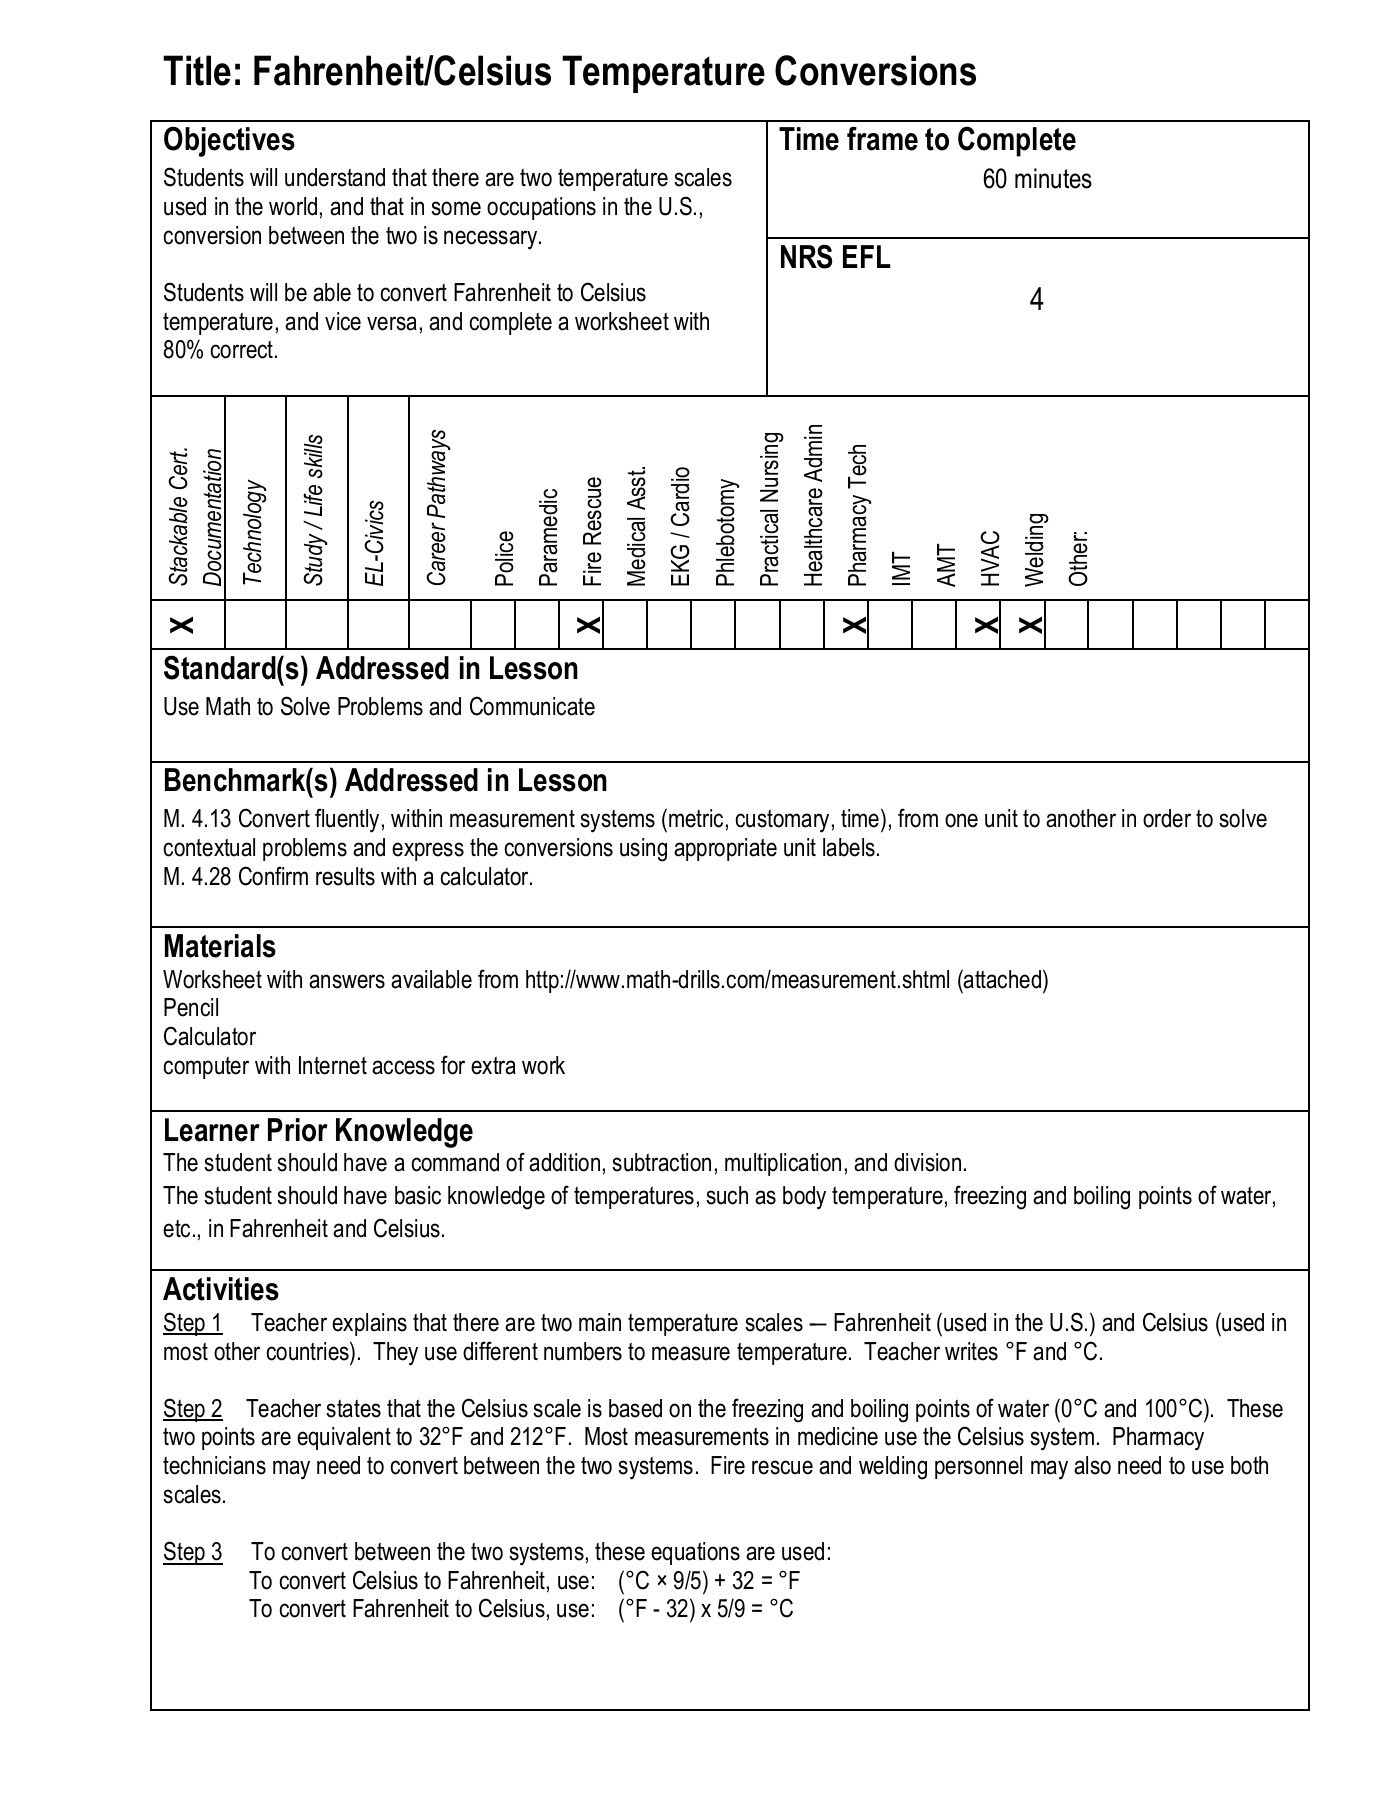 Temperature Conversion Worksheet Answers Title Fahrenheit Celsius Temperature Conversions Pages 1